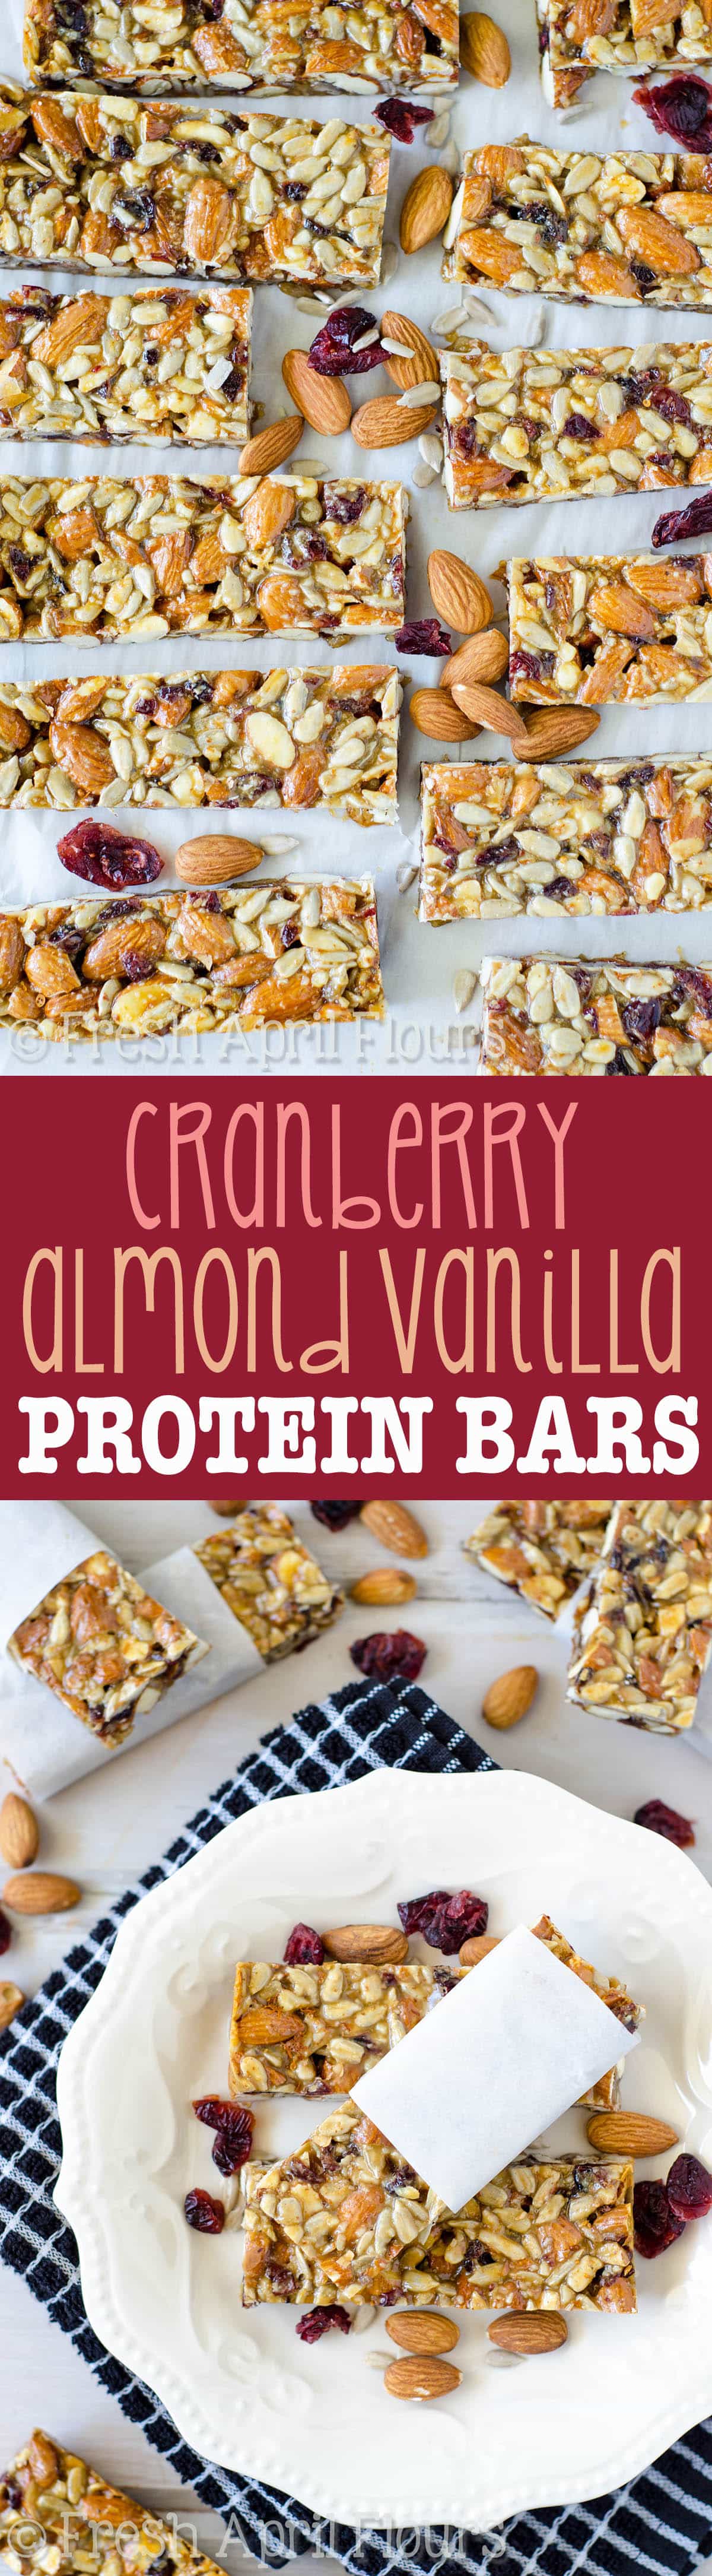 Cranberry Almond Vanilla Protein Bars: Grain free, gluten free, and wholesome protein bars filled with wholesome ingredients and a hefty dose of natural protein. Perfect for on-the-go snacking! via @frshaprilflours